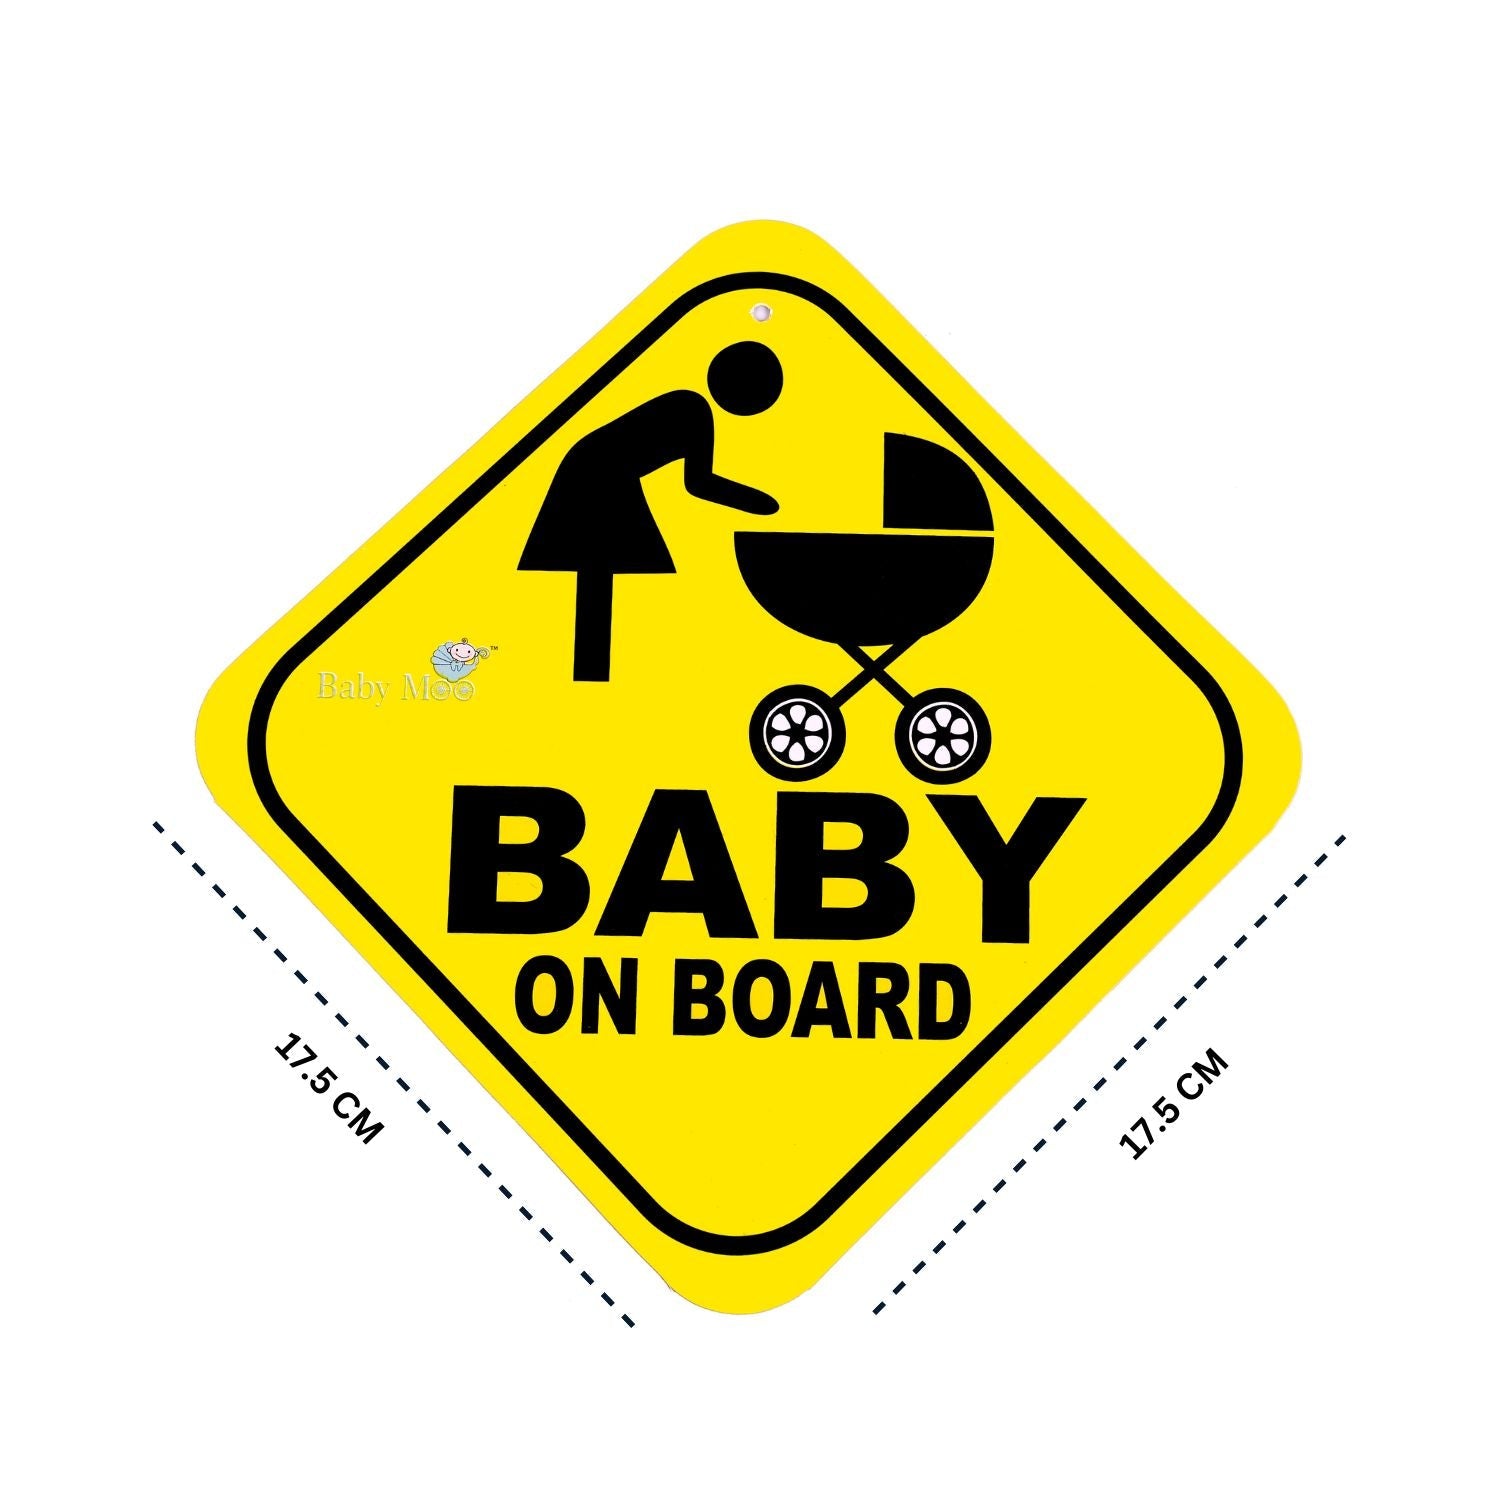 Baby Moo Car Safety Sign Baby On Board With Vacuum Suction Cup Clip - Yellow